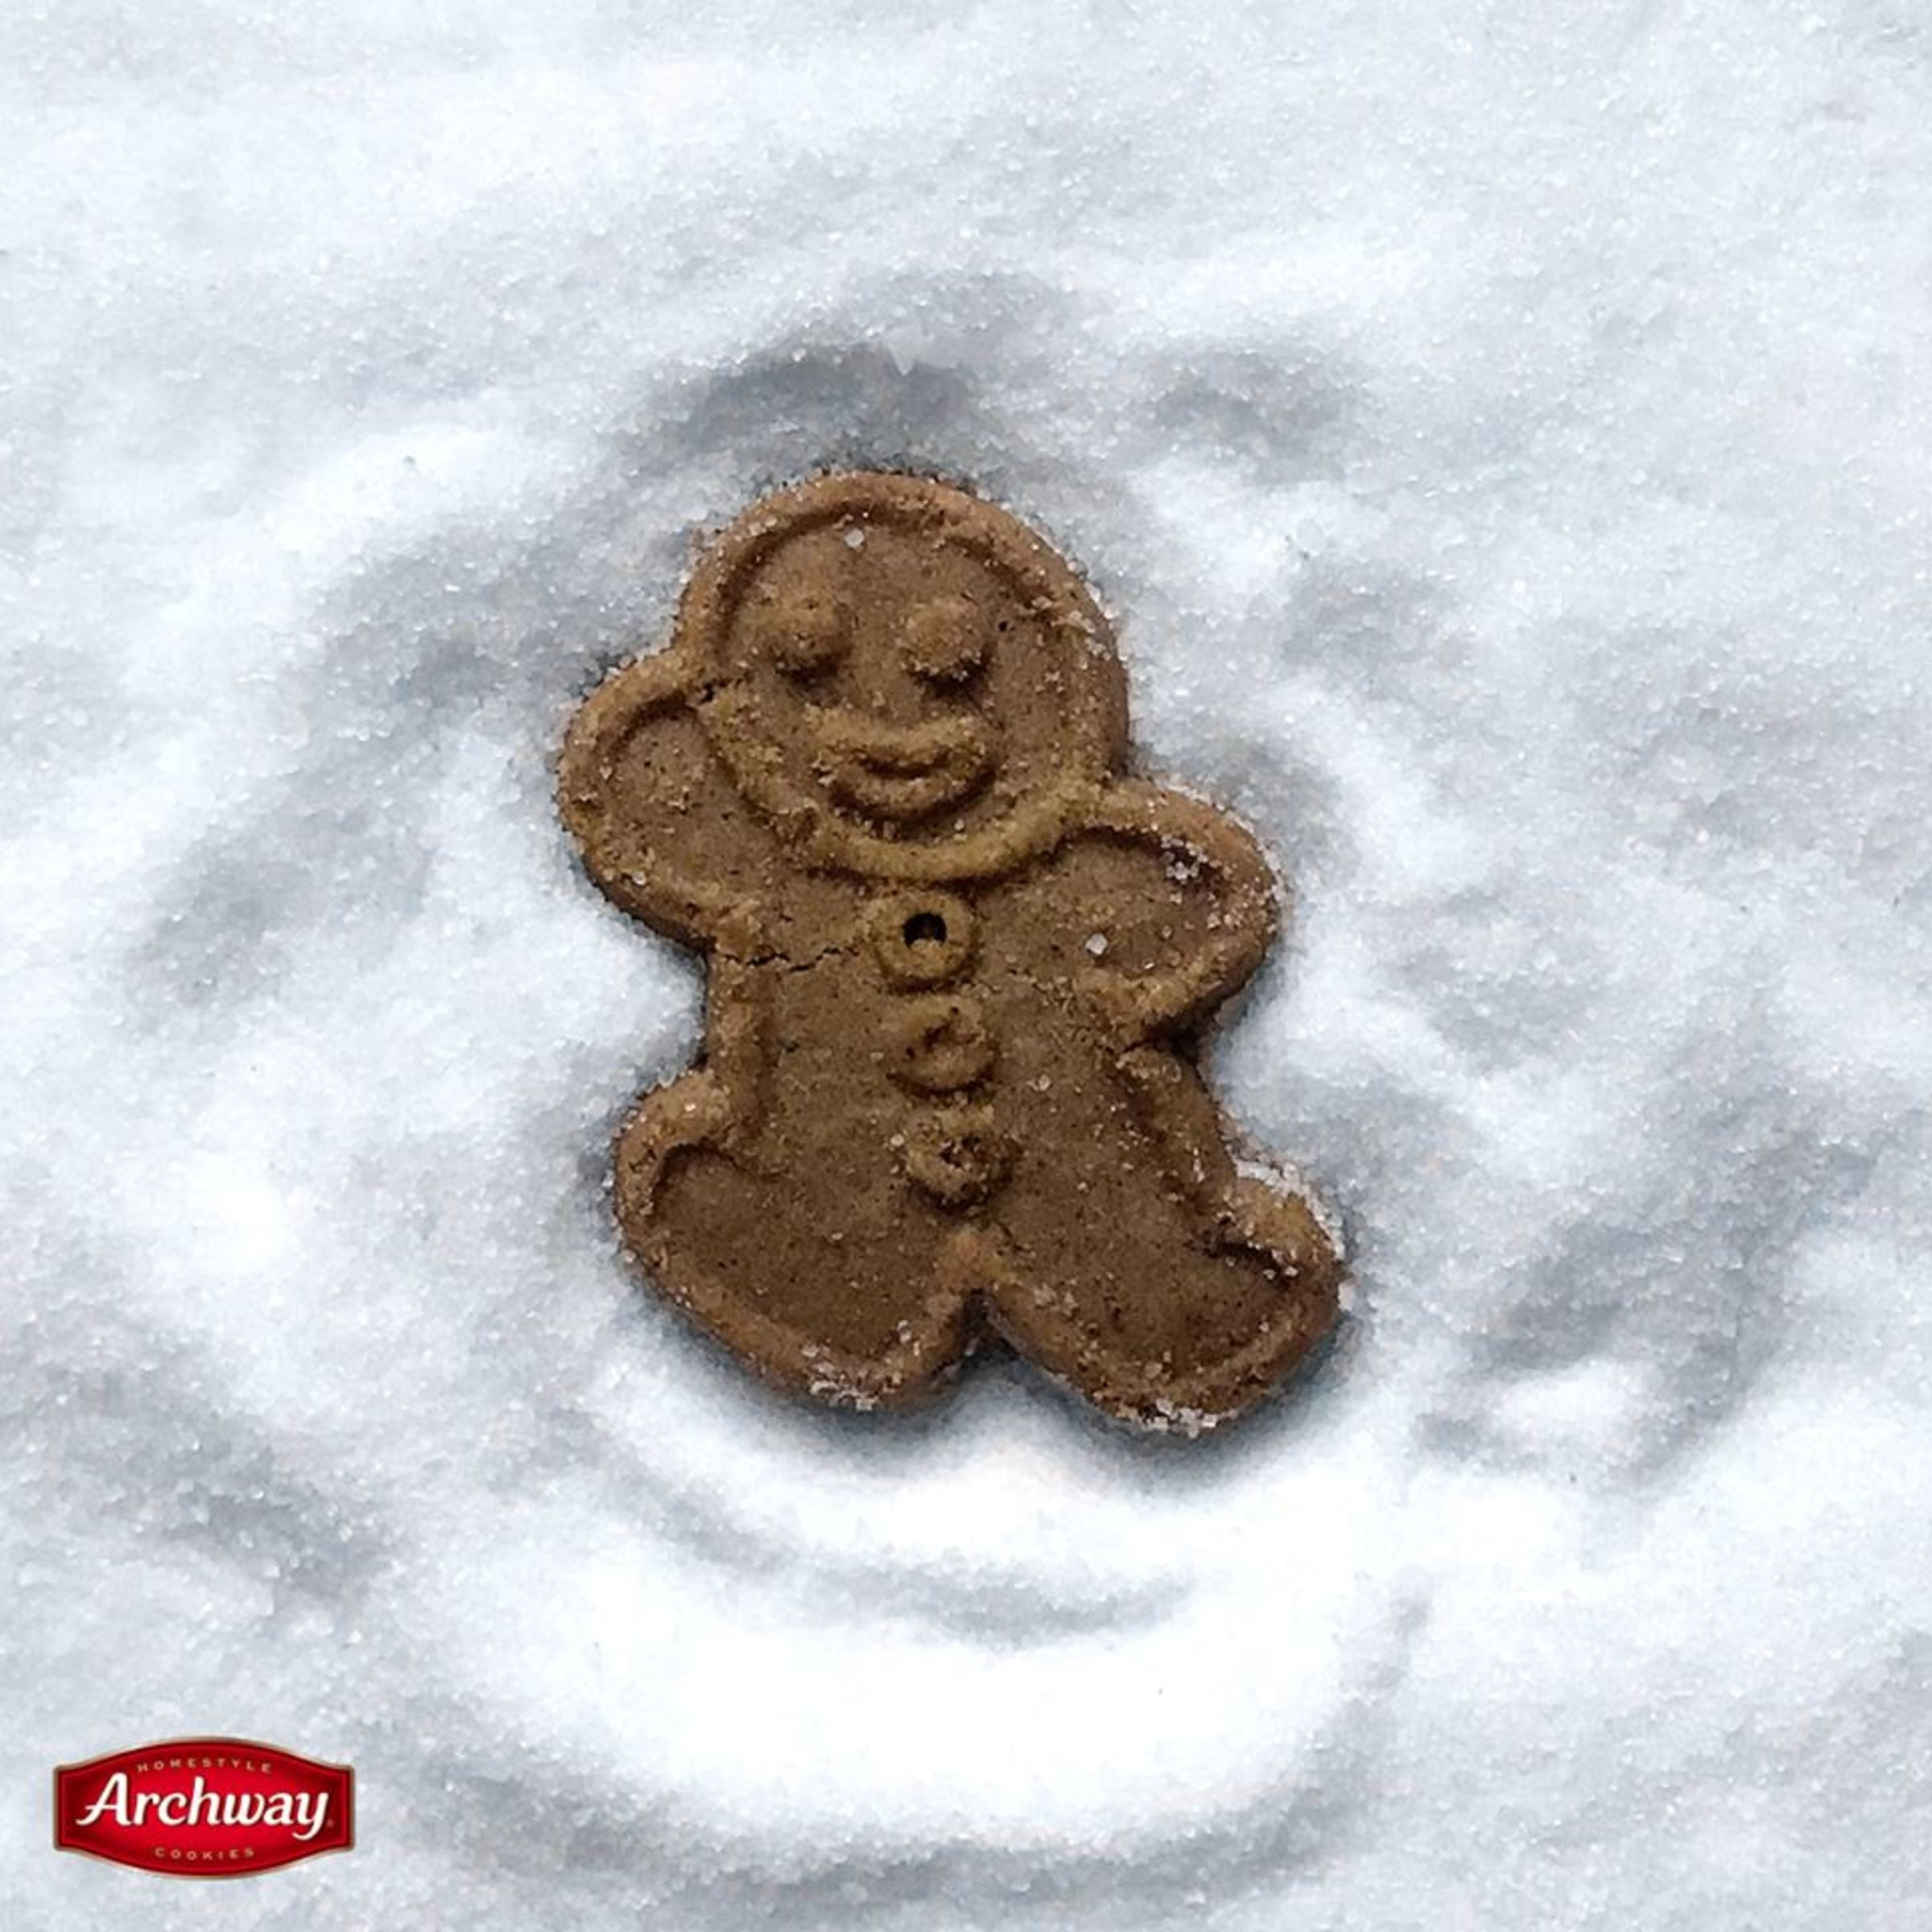 Archway Iced Gingerbread Man Cookies : Decorate cookies ...